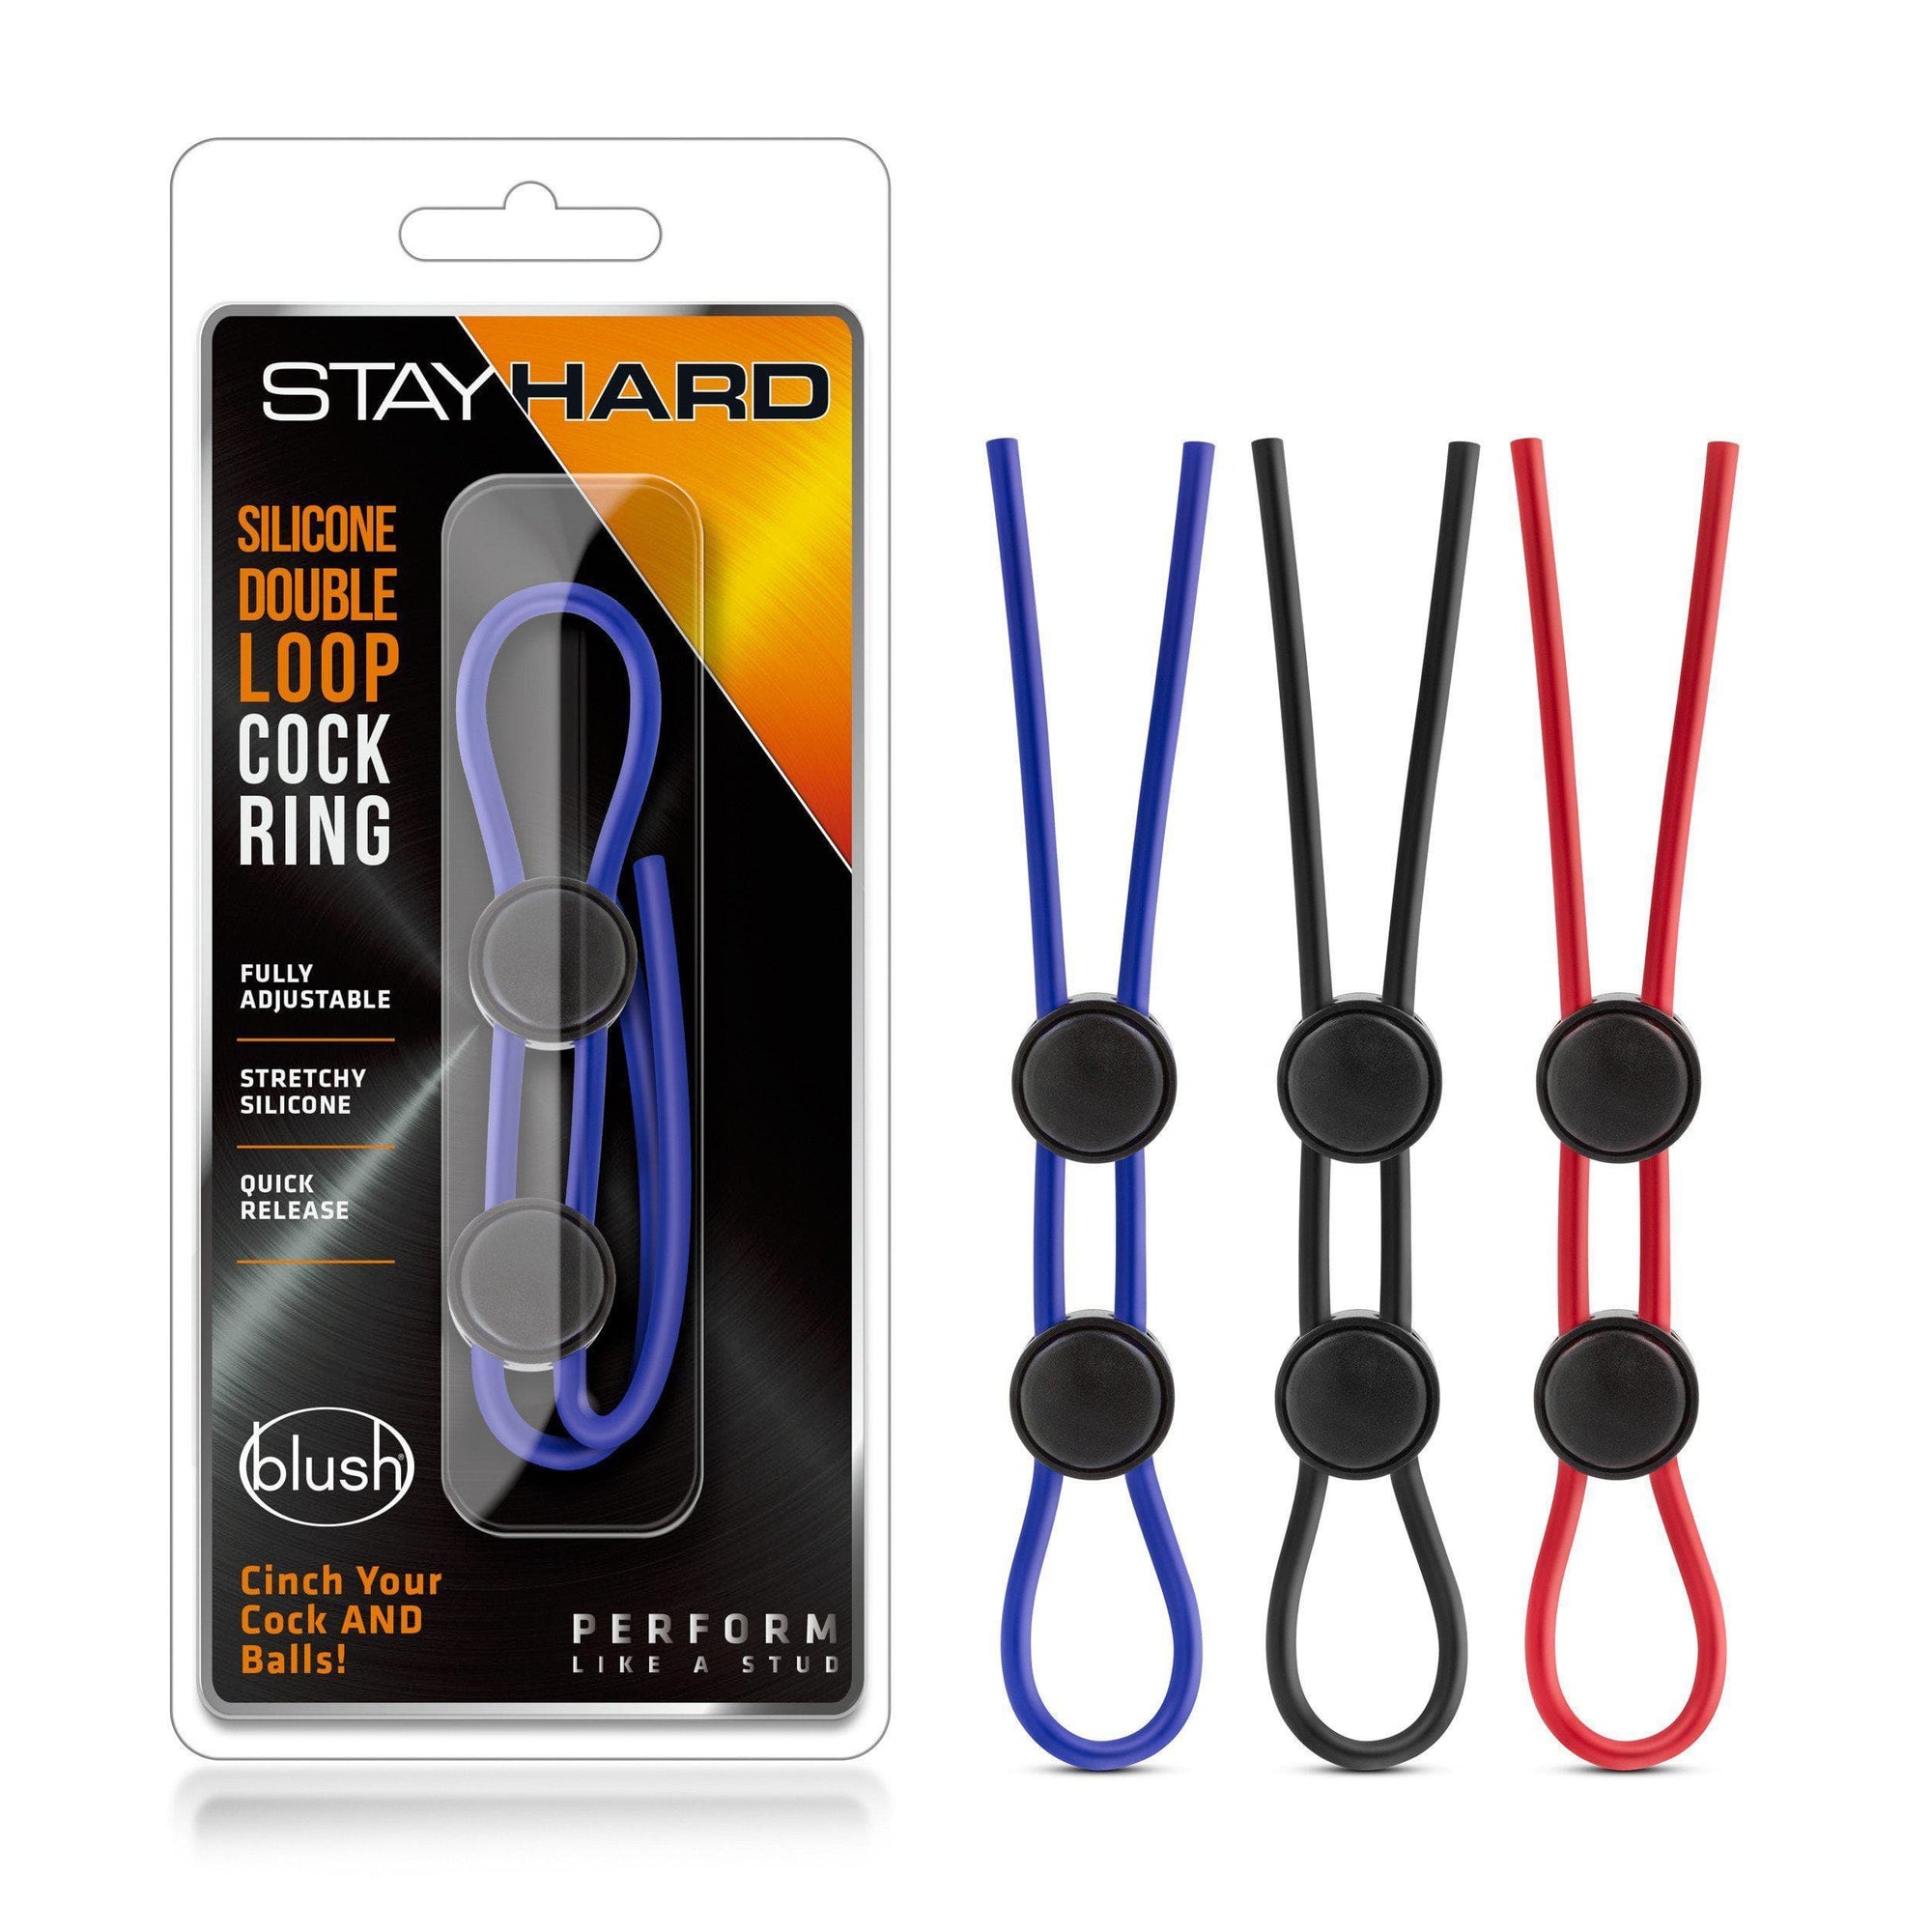 Stay Hard Silicone Double Loop Penis and Scrotum Erection Enhancement Lasso Ring - Romantic Blessings